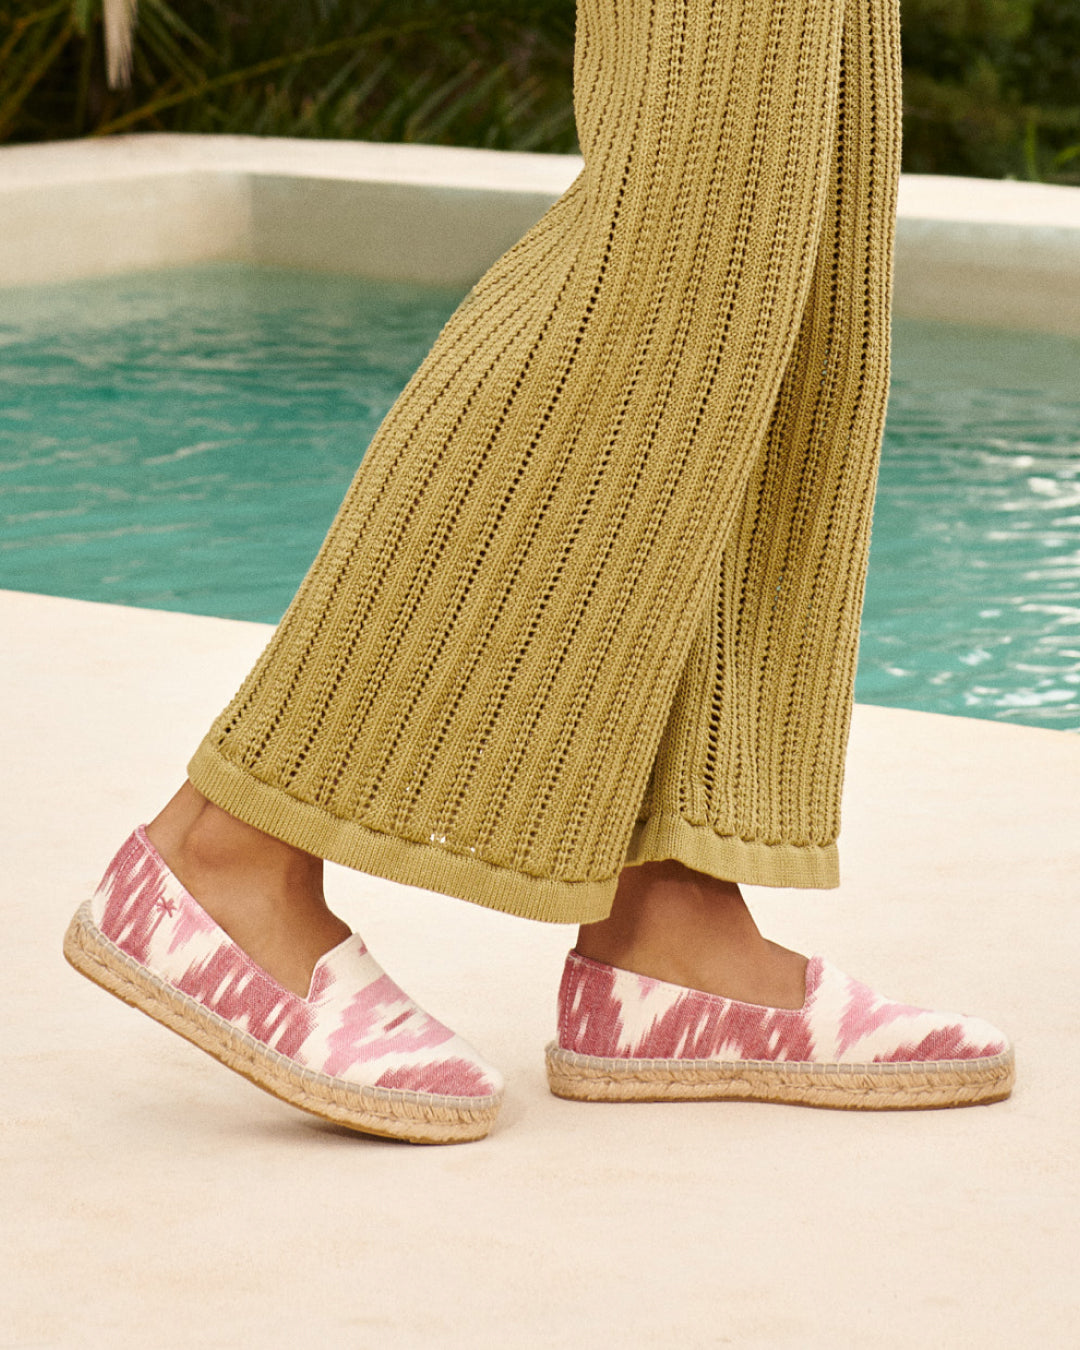 Dyed Cotton Flat Espadrilles - Tulum Pink And White Ikat